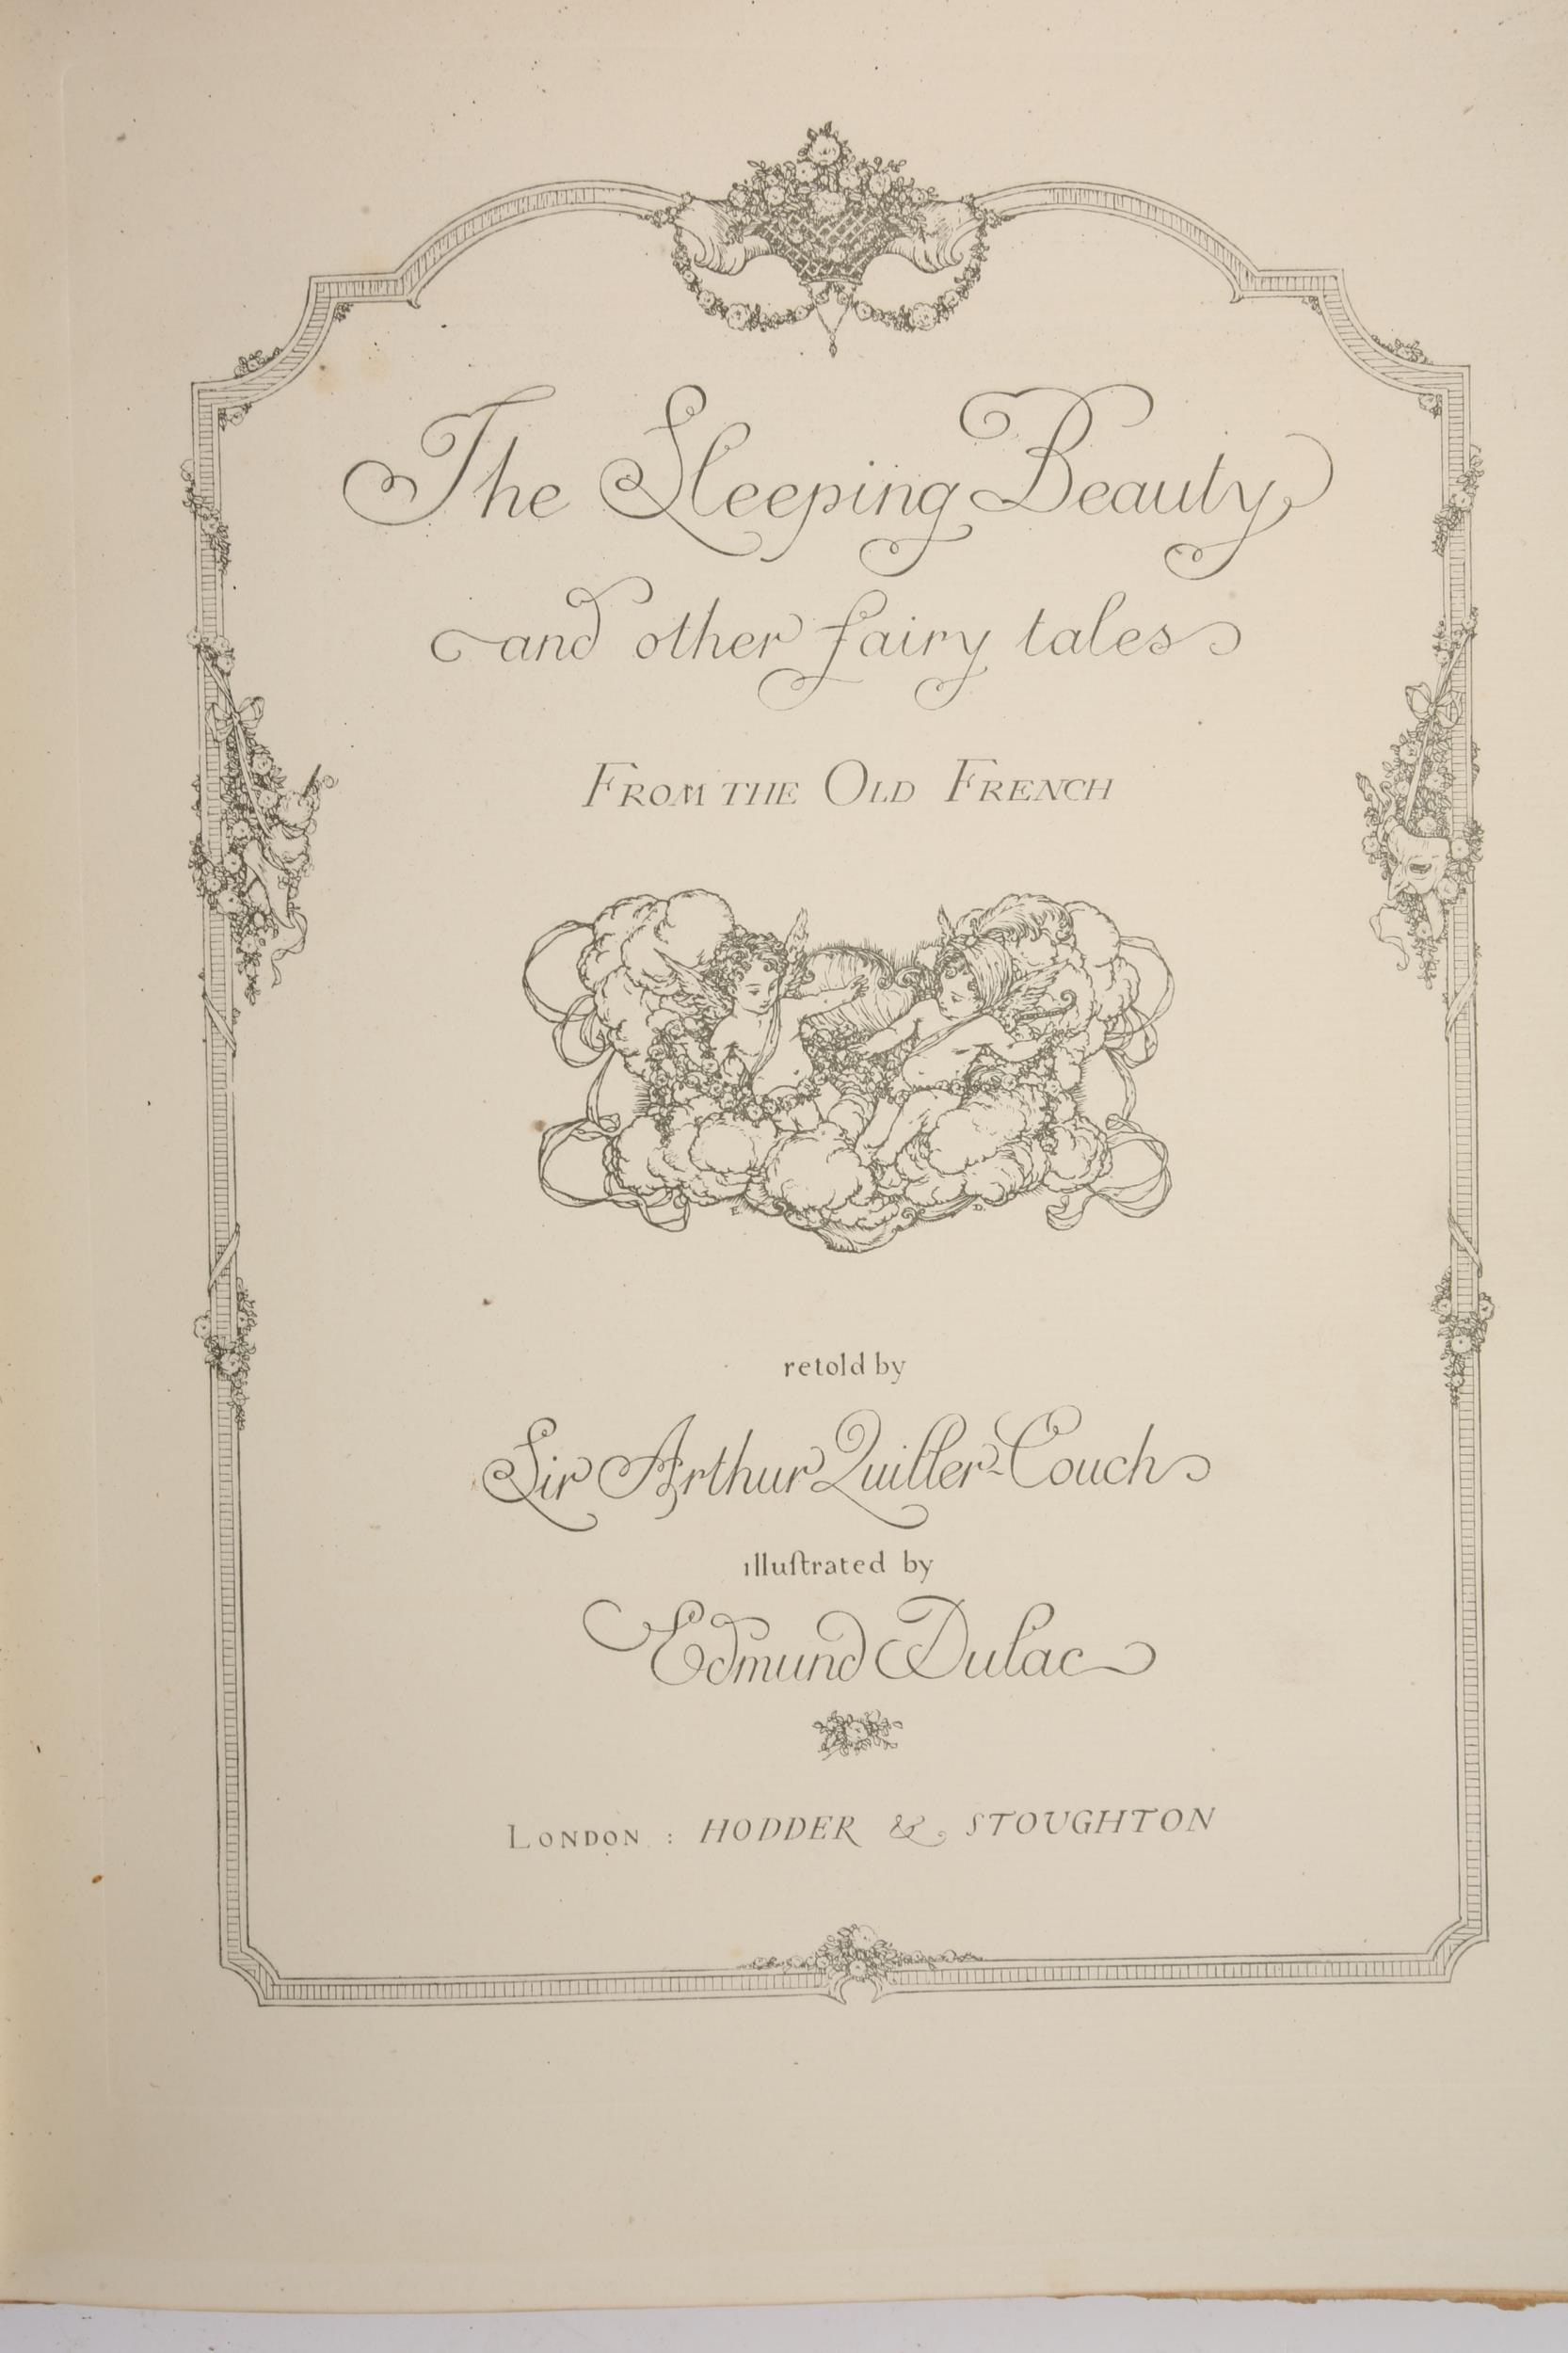 Arthur Quiller-Couch, 'The Sleeping Beauty and Other Fairy Tales', London, Hodder & Stoughton, - Image 19 of 21